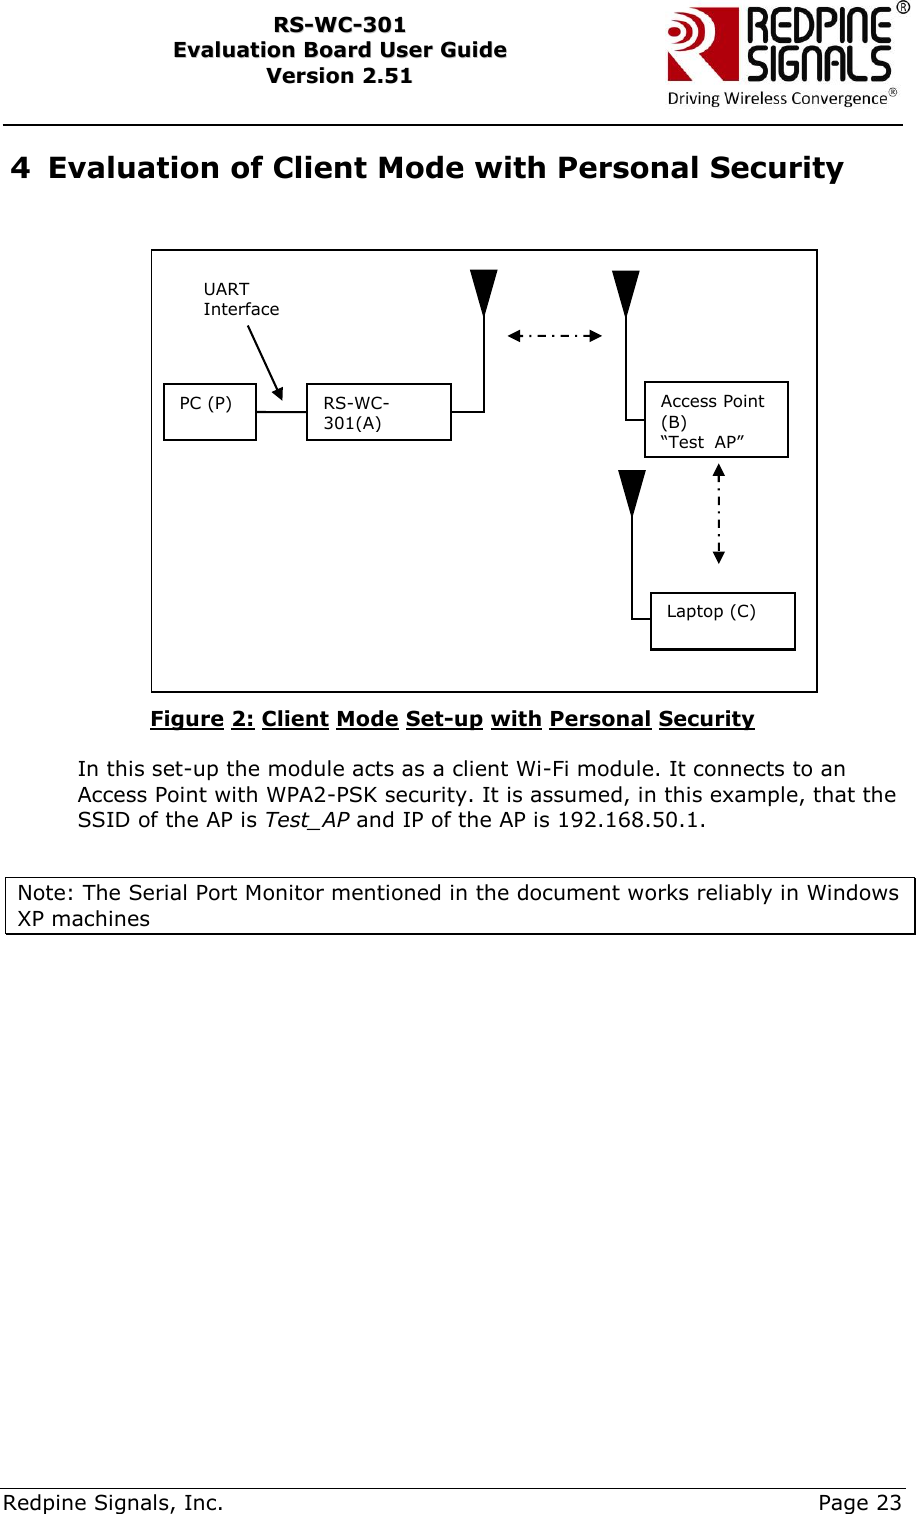     Redpine Signals, Inc.     Page 23 RRSS--WWCC--330011    EEvvaalluuaattiioonn  BBooaarrdd  UUsseerr  GGuuiiddee  VVeerrssiioonn  22..5511    4 Evaluation of Client Mode with Personal Security   Figure 2: Client Mode Set-up with Personal Security  In this set-up the module acts as a client Wi-Fi module. It connects to an Access Point with WPA2-PSK security. It is assumed, in this example, that the SSID of the AP is Test_AP and IP of the AP is 192.168.50.1.  Note: The Serial Port Monitor mentioned in the document works reliably in Windows XP machines   PC (P) RS-WC-301(A) UART Interface Access Point (B) “Test_AP” Laptop (C) 